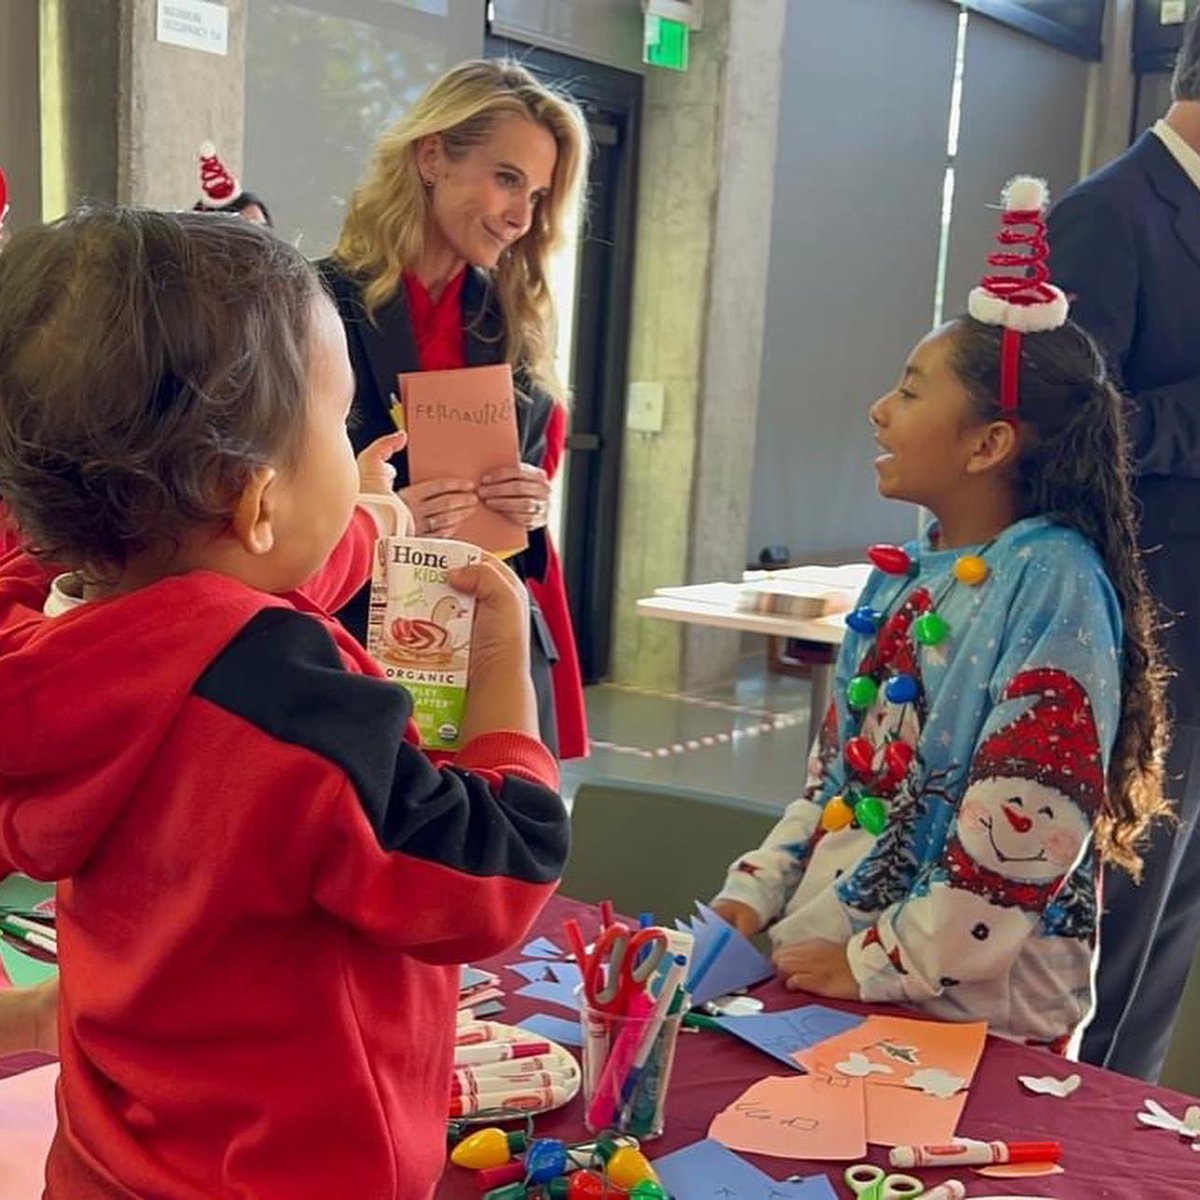 Honored to host @GavinNewsom and @JenSiebelNewsom at one of our new affordable housing/childcare sites. The Governor’s investment in #PromiseNeighborhoods allows for these these type of large-scale solutions. Thanks to the First Family for also helping deliver gift bags.